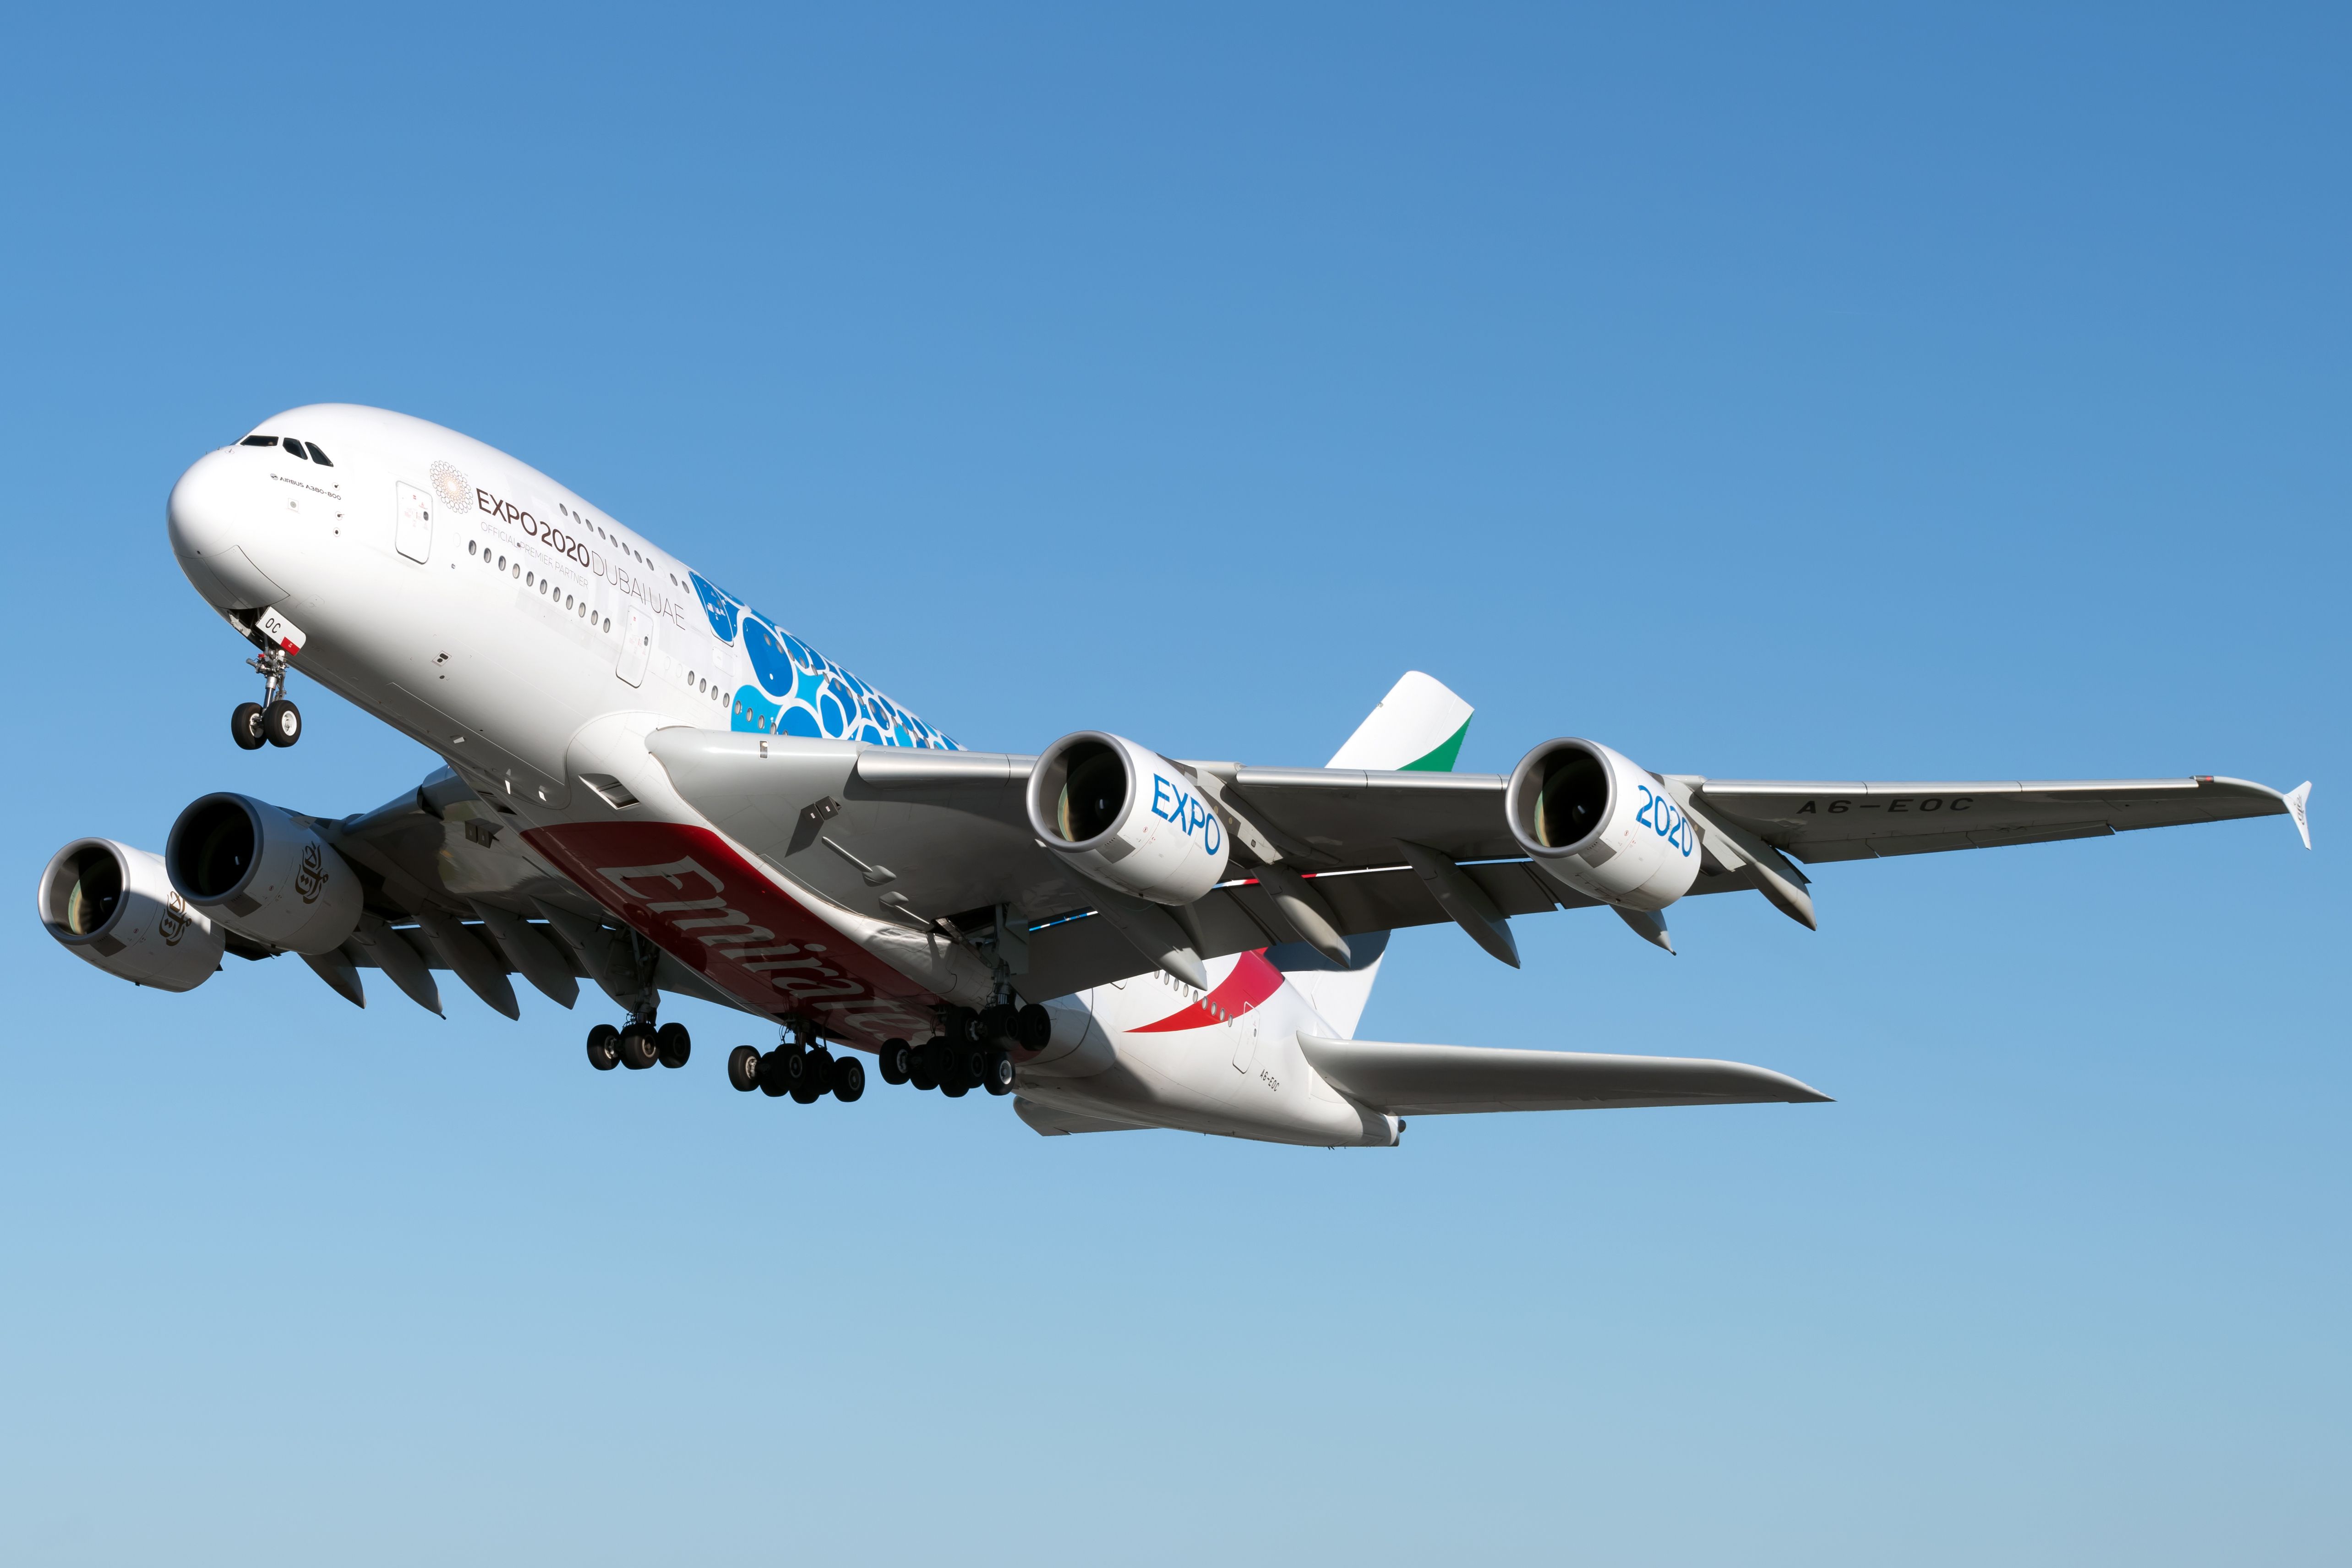 Emirates (Expo 2020 - Mobility Livery) Airbus A380-861 A6-EOC